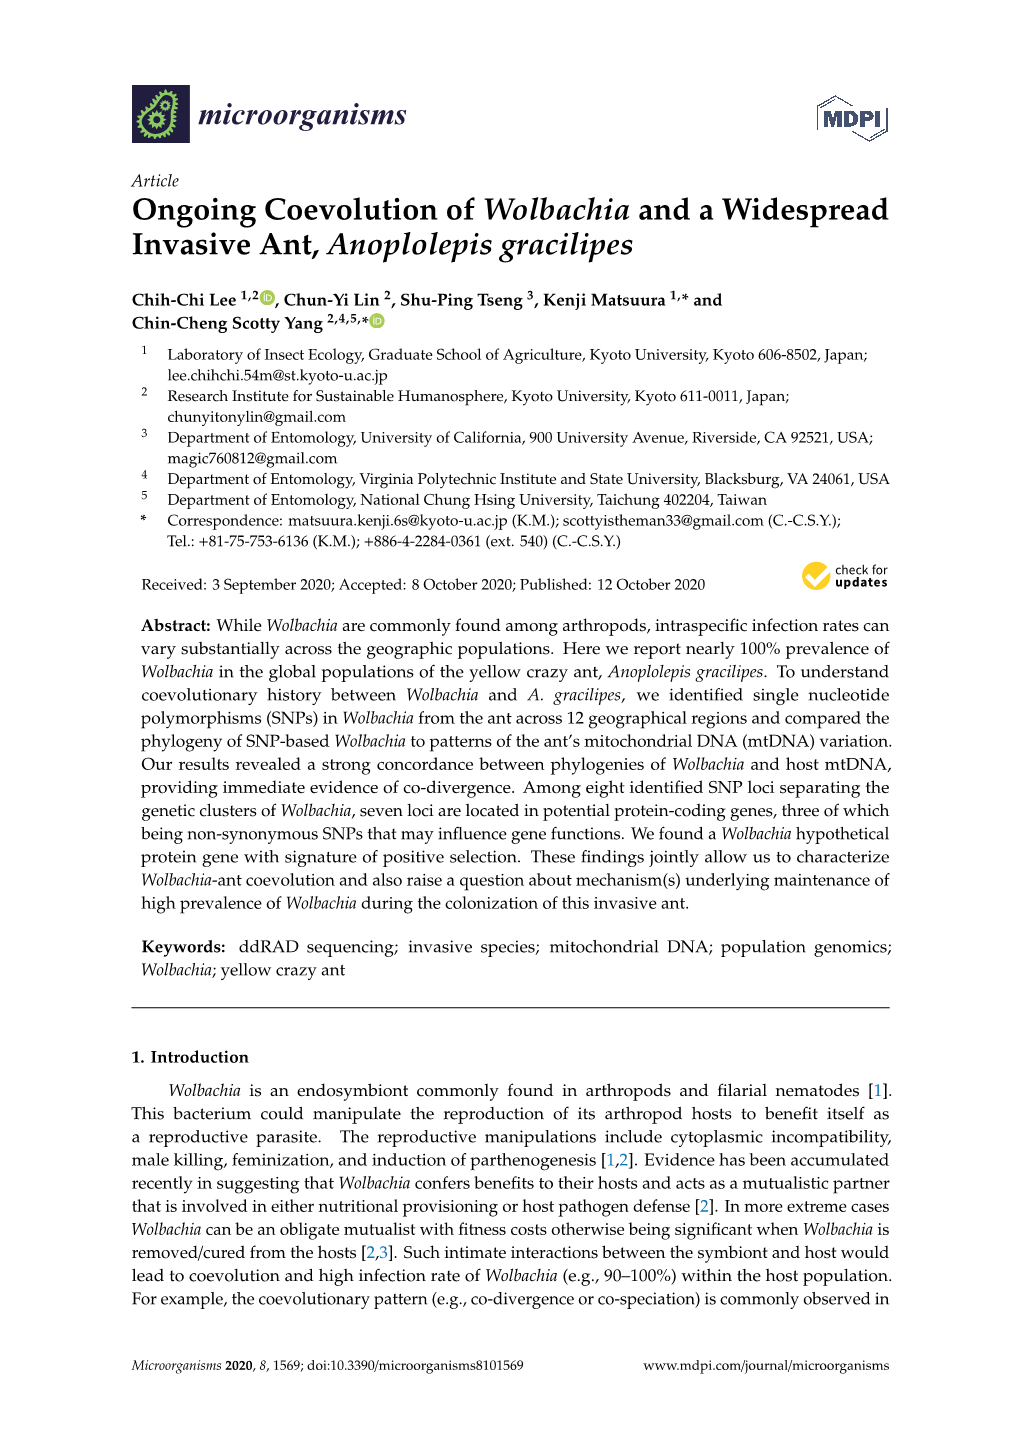 Ongoing Coevolution of Wolbachia and a Widespread Invasive Ant, Anoplolepis Gracilipes